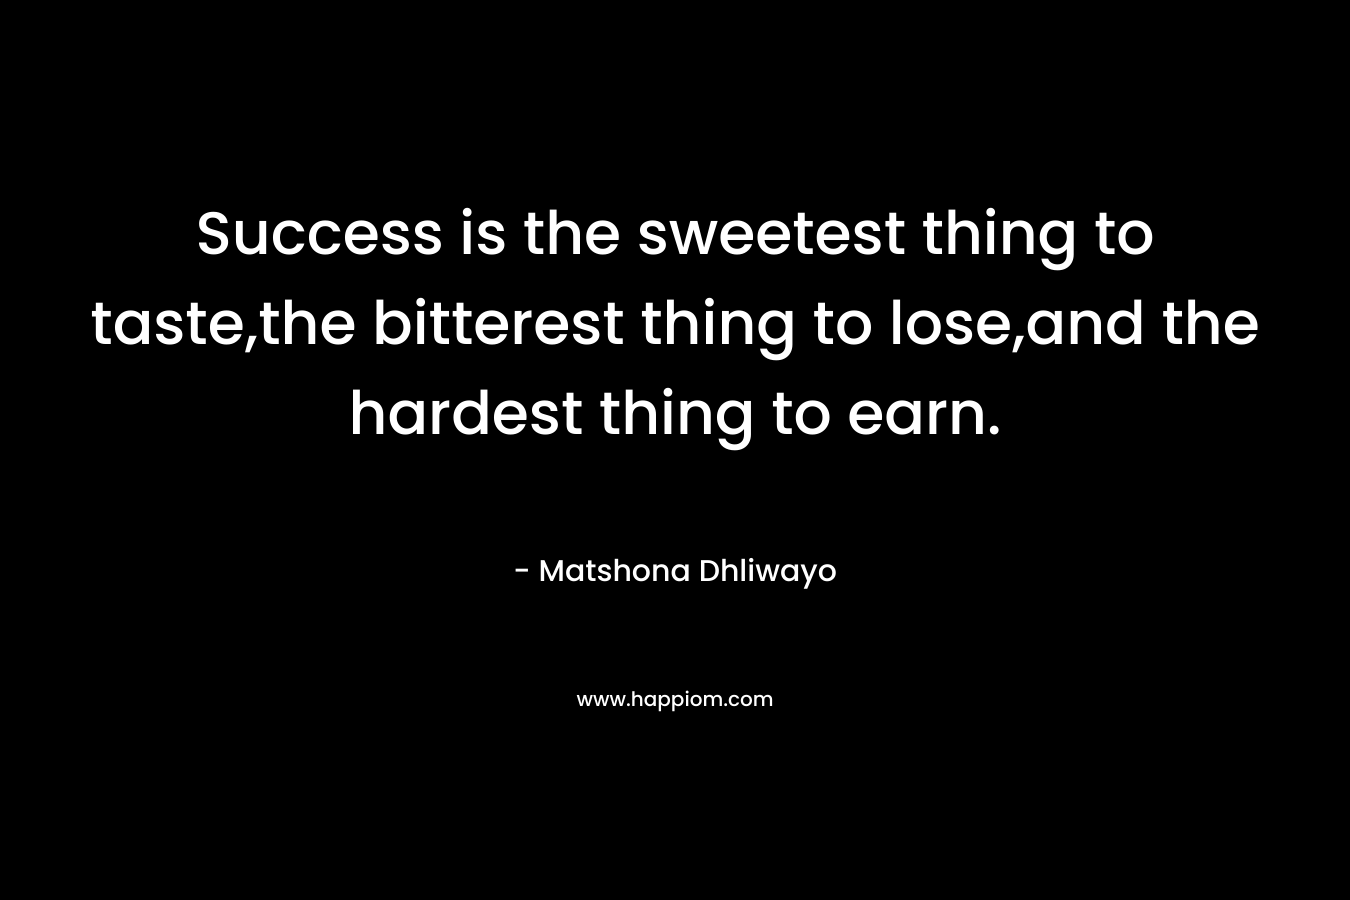 Success is the sweetest thing to taste,the bitterest thing to lose,and the hardest thing to earn. – Matshona Dhliwayo